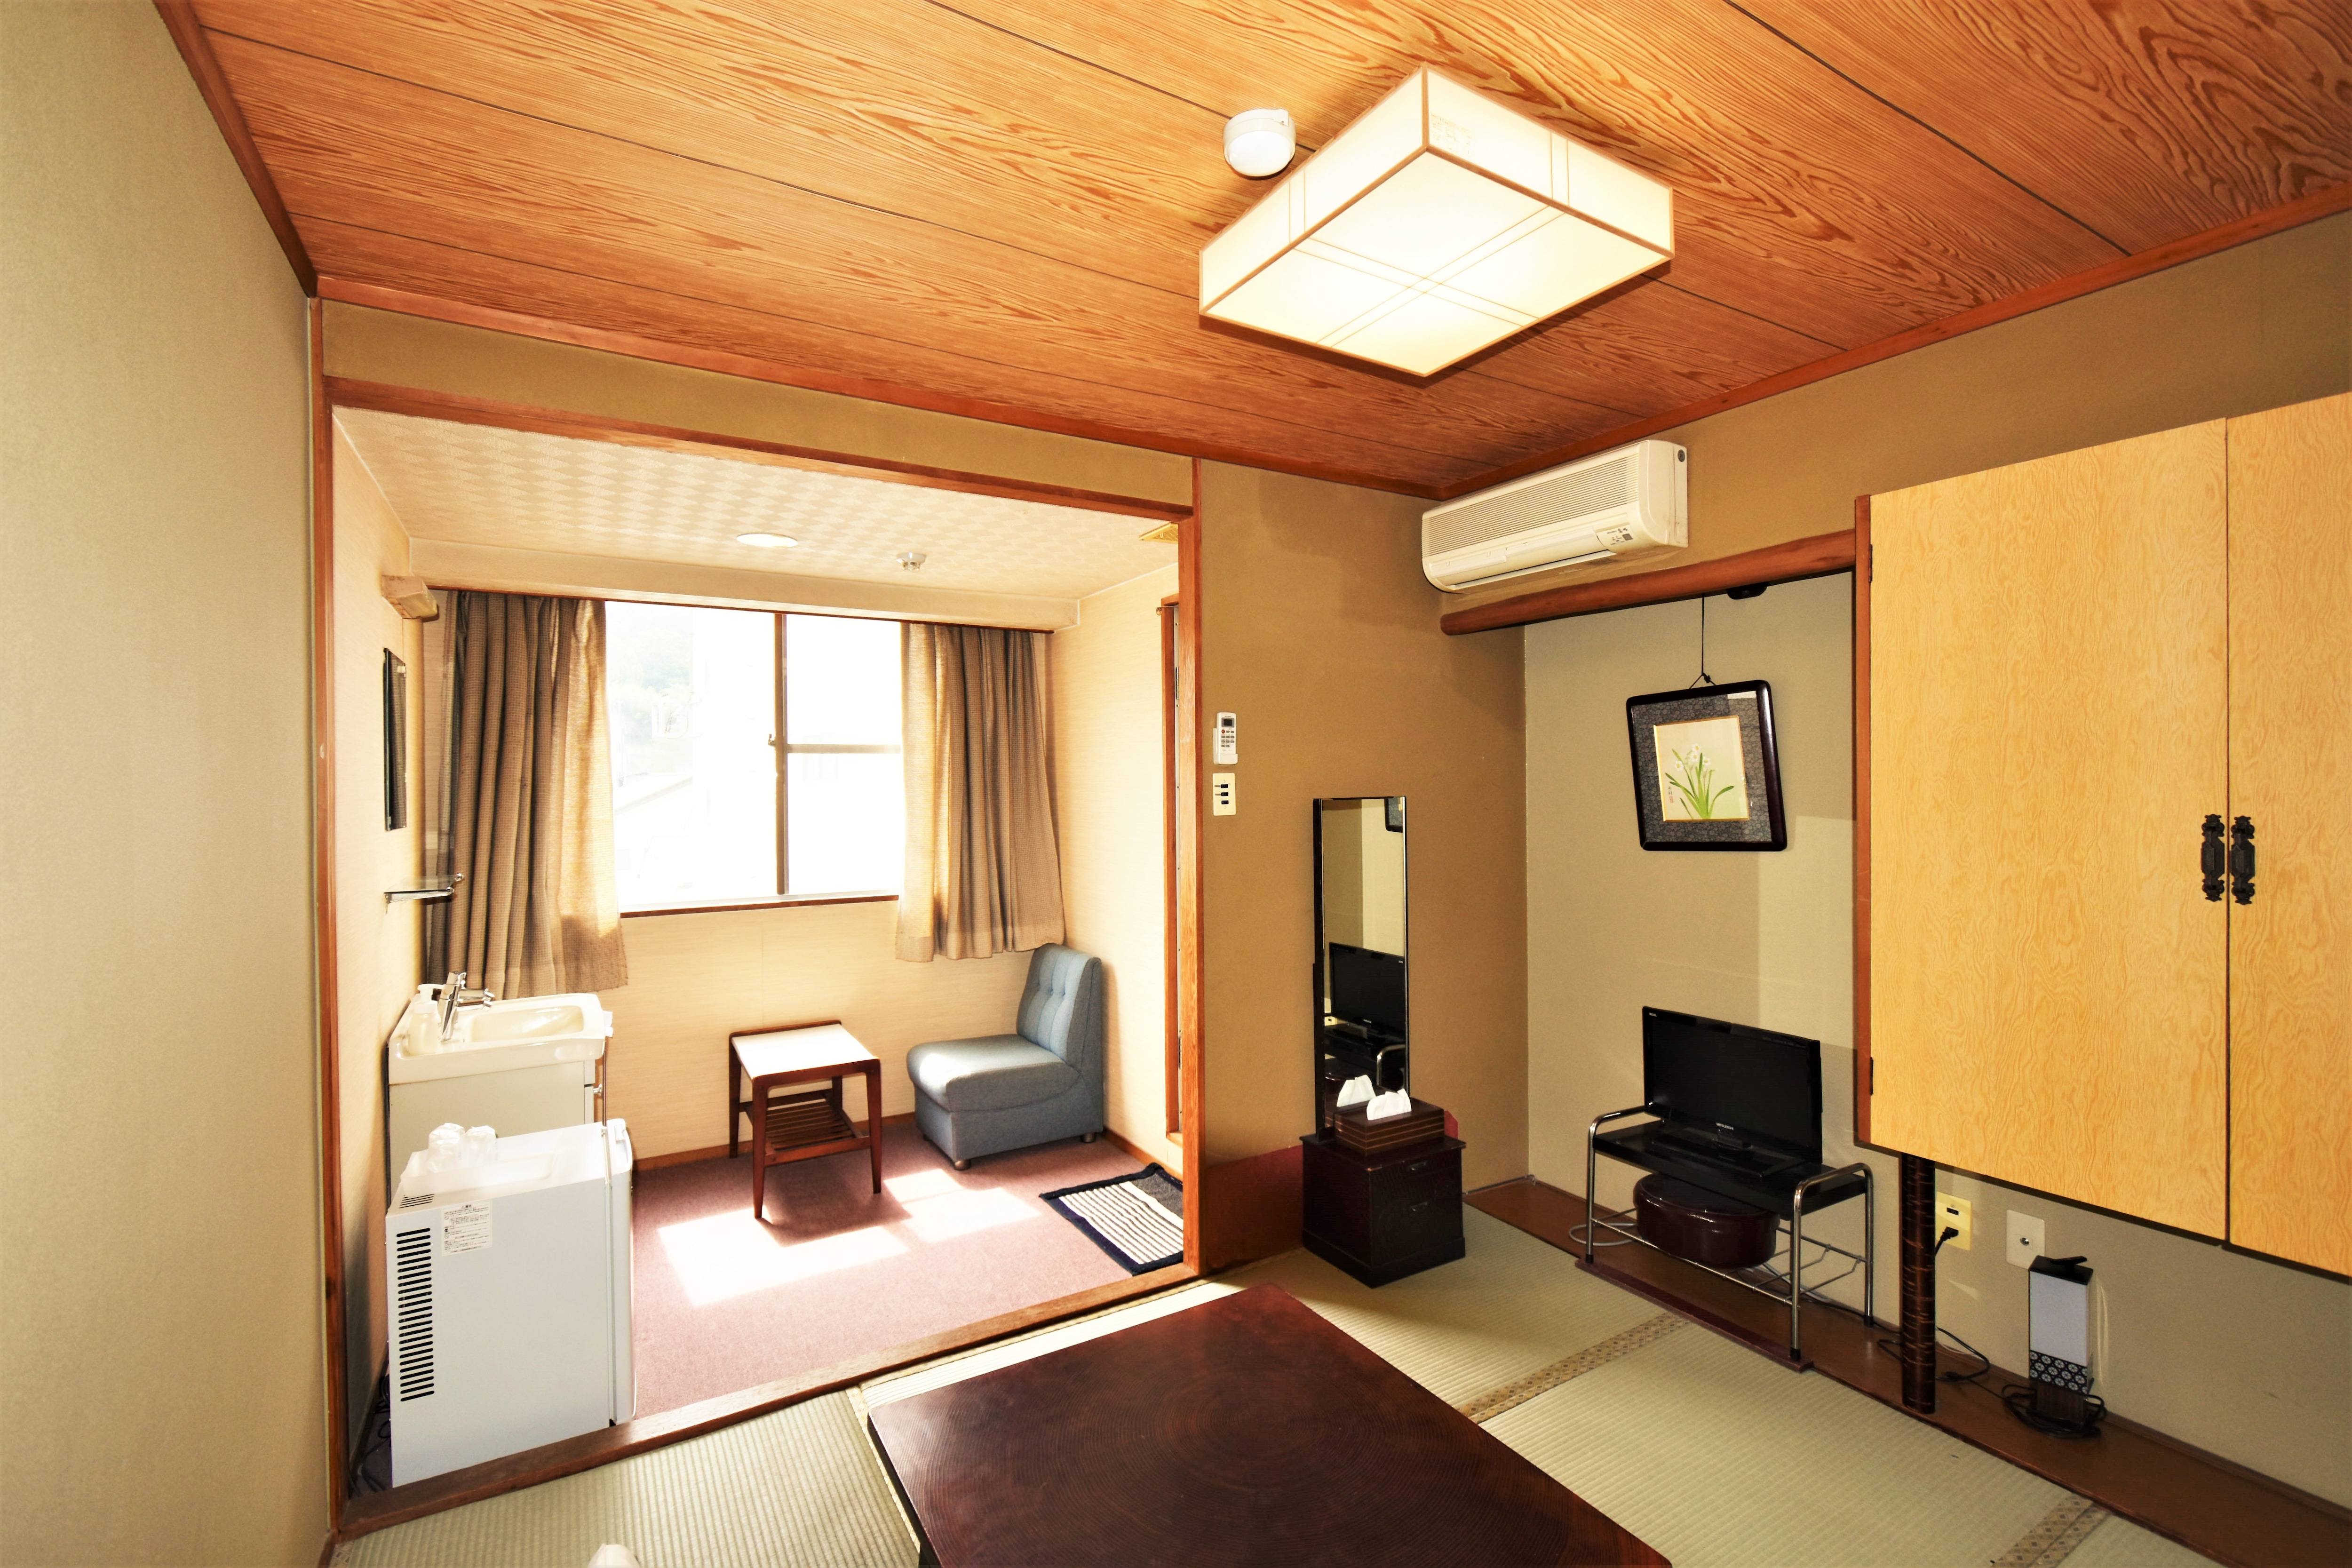 <4.5 tatami Japanese-style room> An example